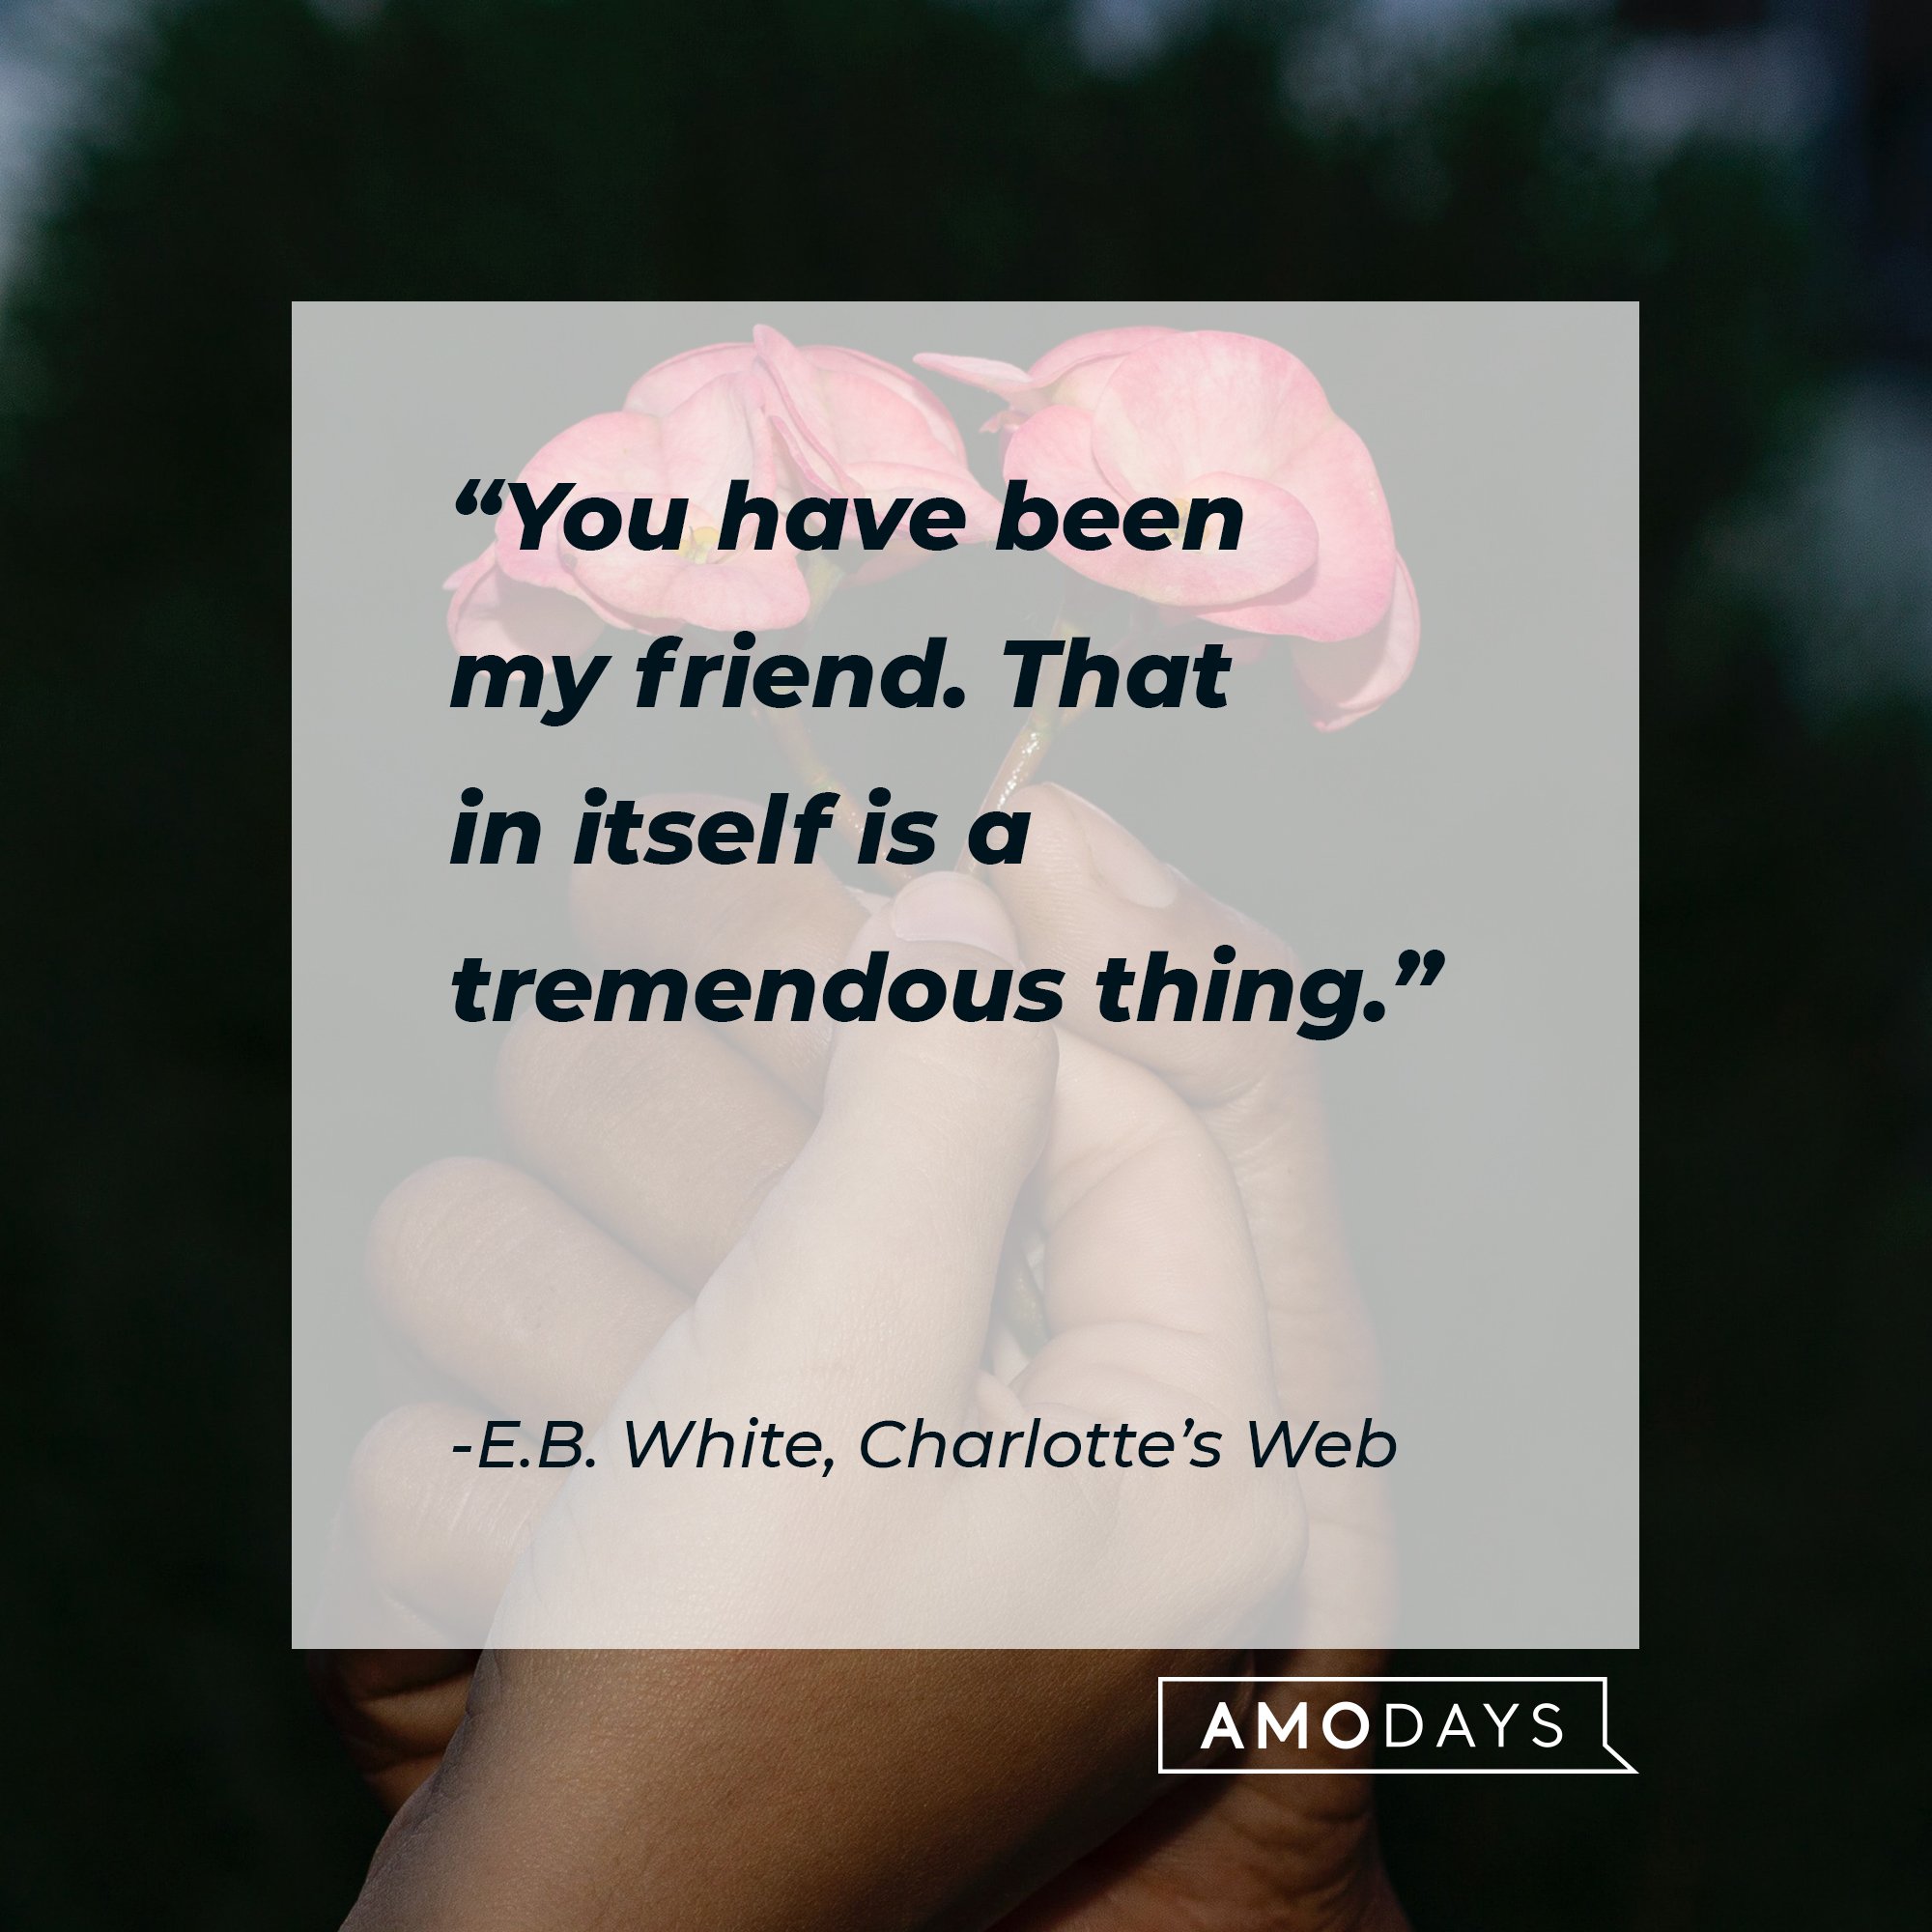 E.B. White’s quote: “You have been my friend. That in itself is a tremendous thing.”  | Image: AmoDays